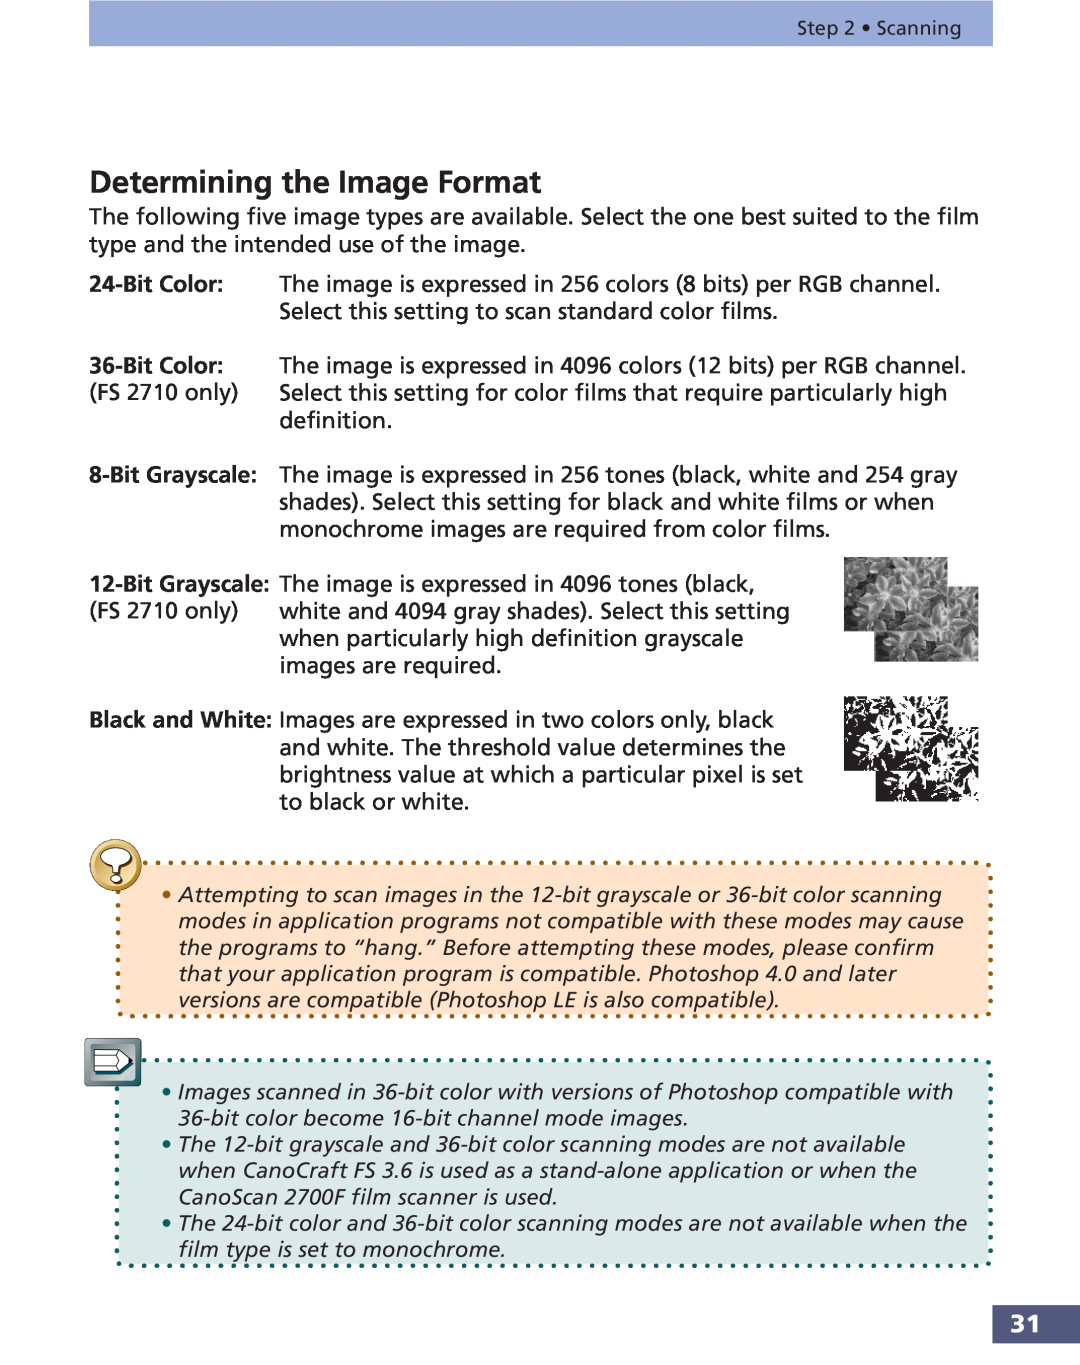 Canon FS 3.6 manual Determining the Image Format 